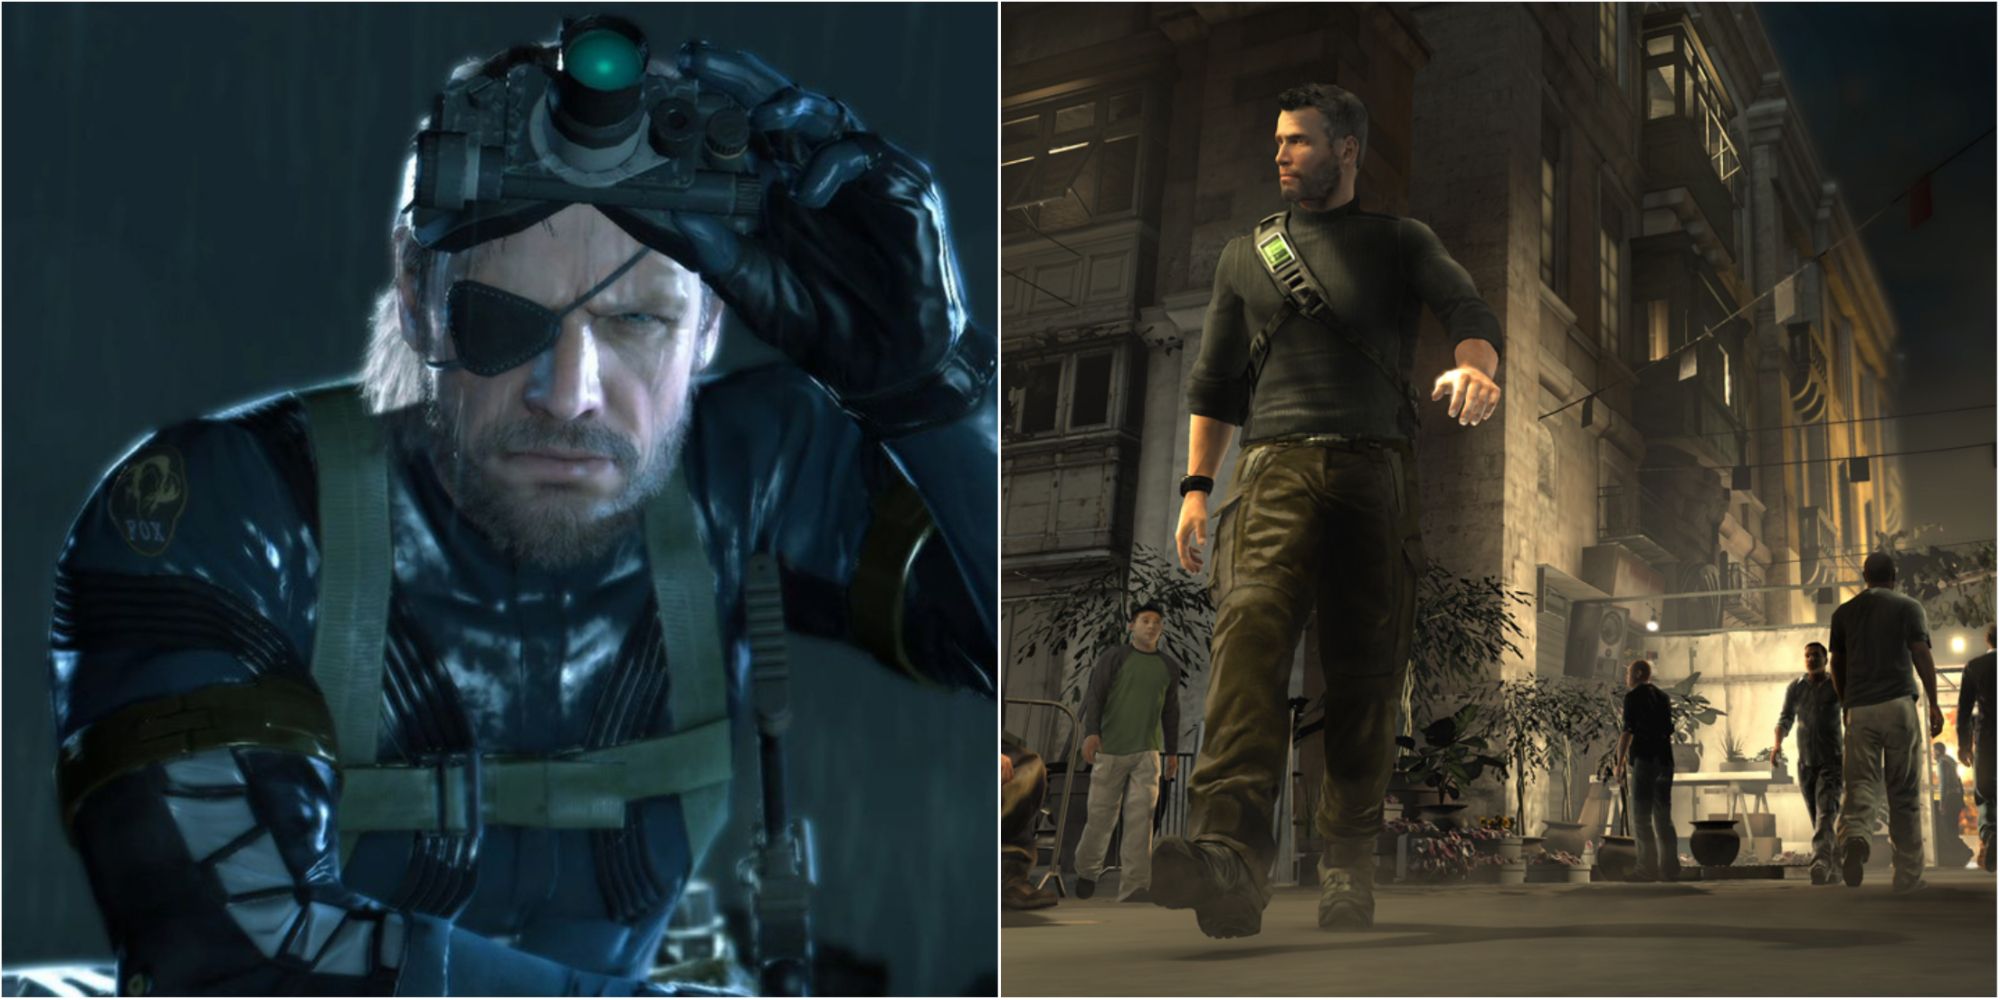 Relatable Things From Stealth Games Featured Split Image Big Boss and Sam Fisher